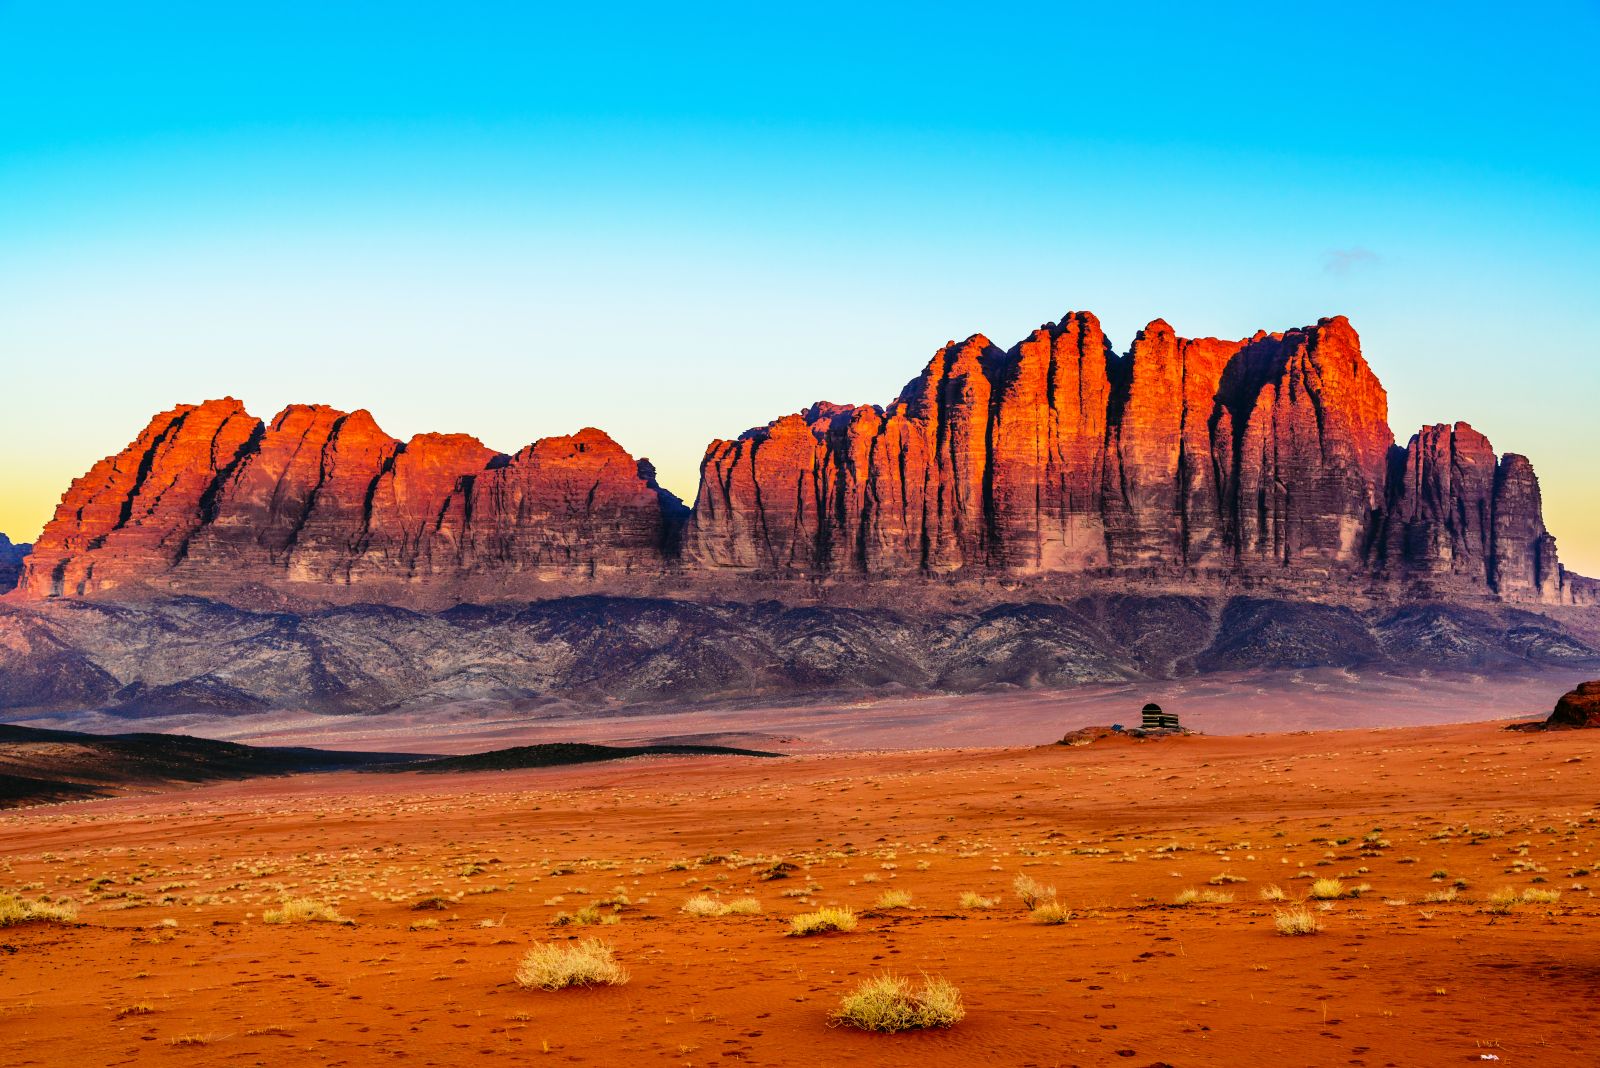 Panorama of the red sand and red cliffs of Wadi Rum in Jordan